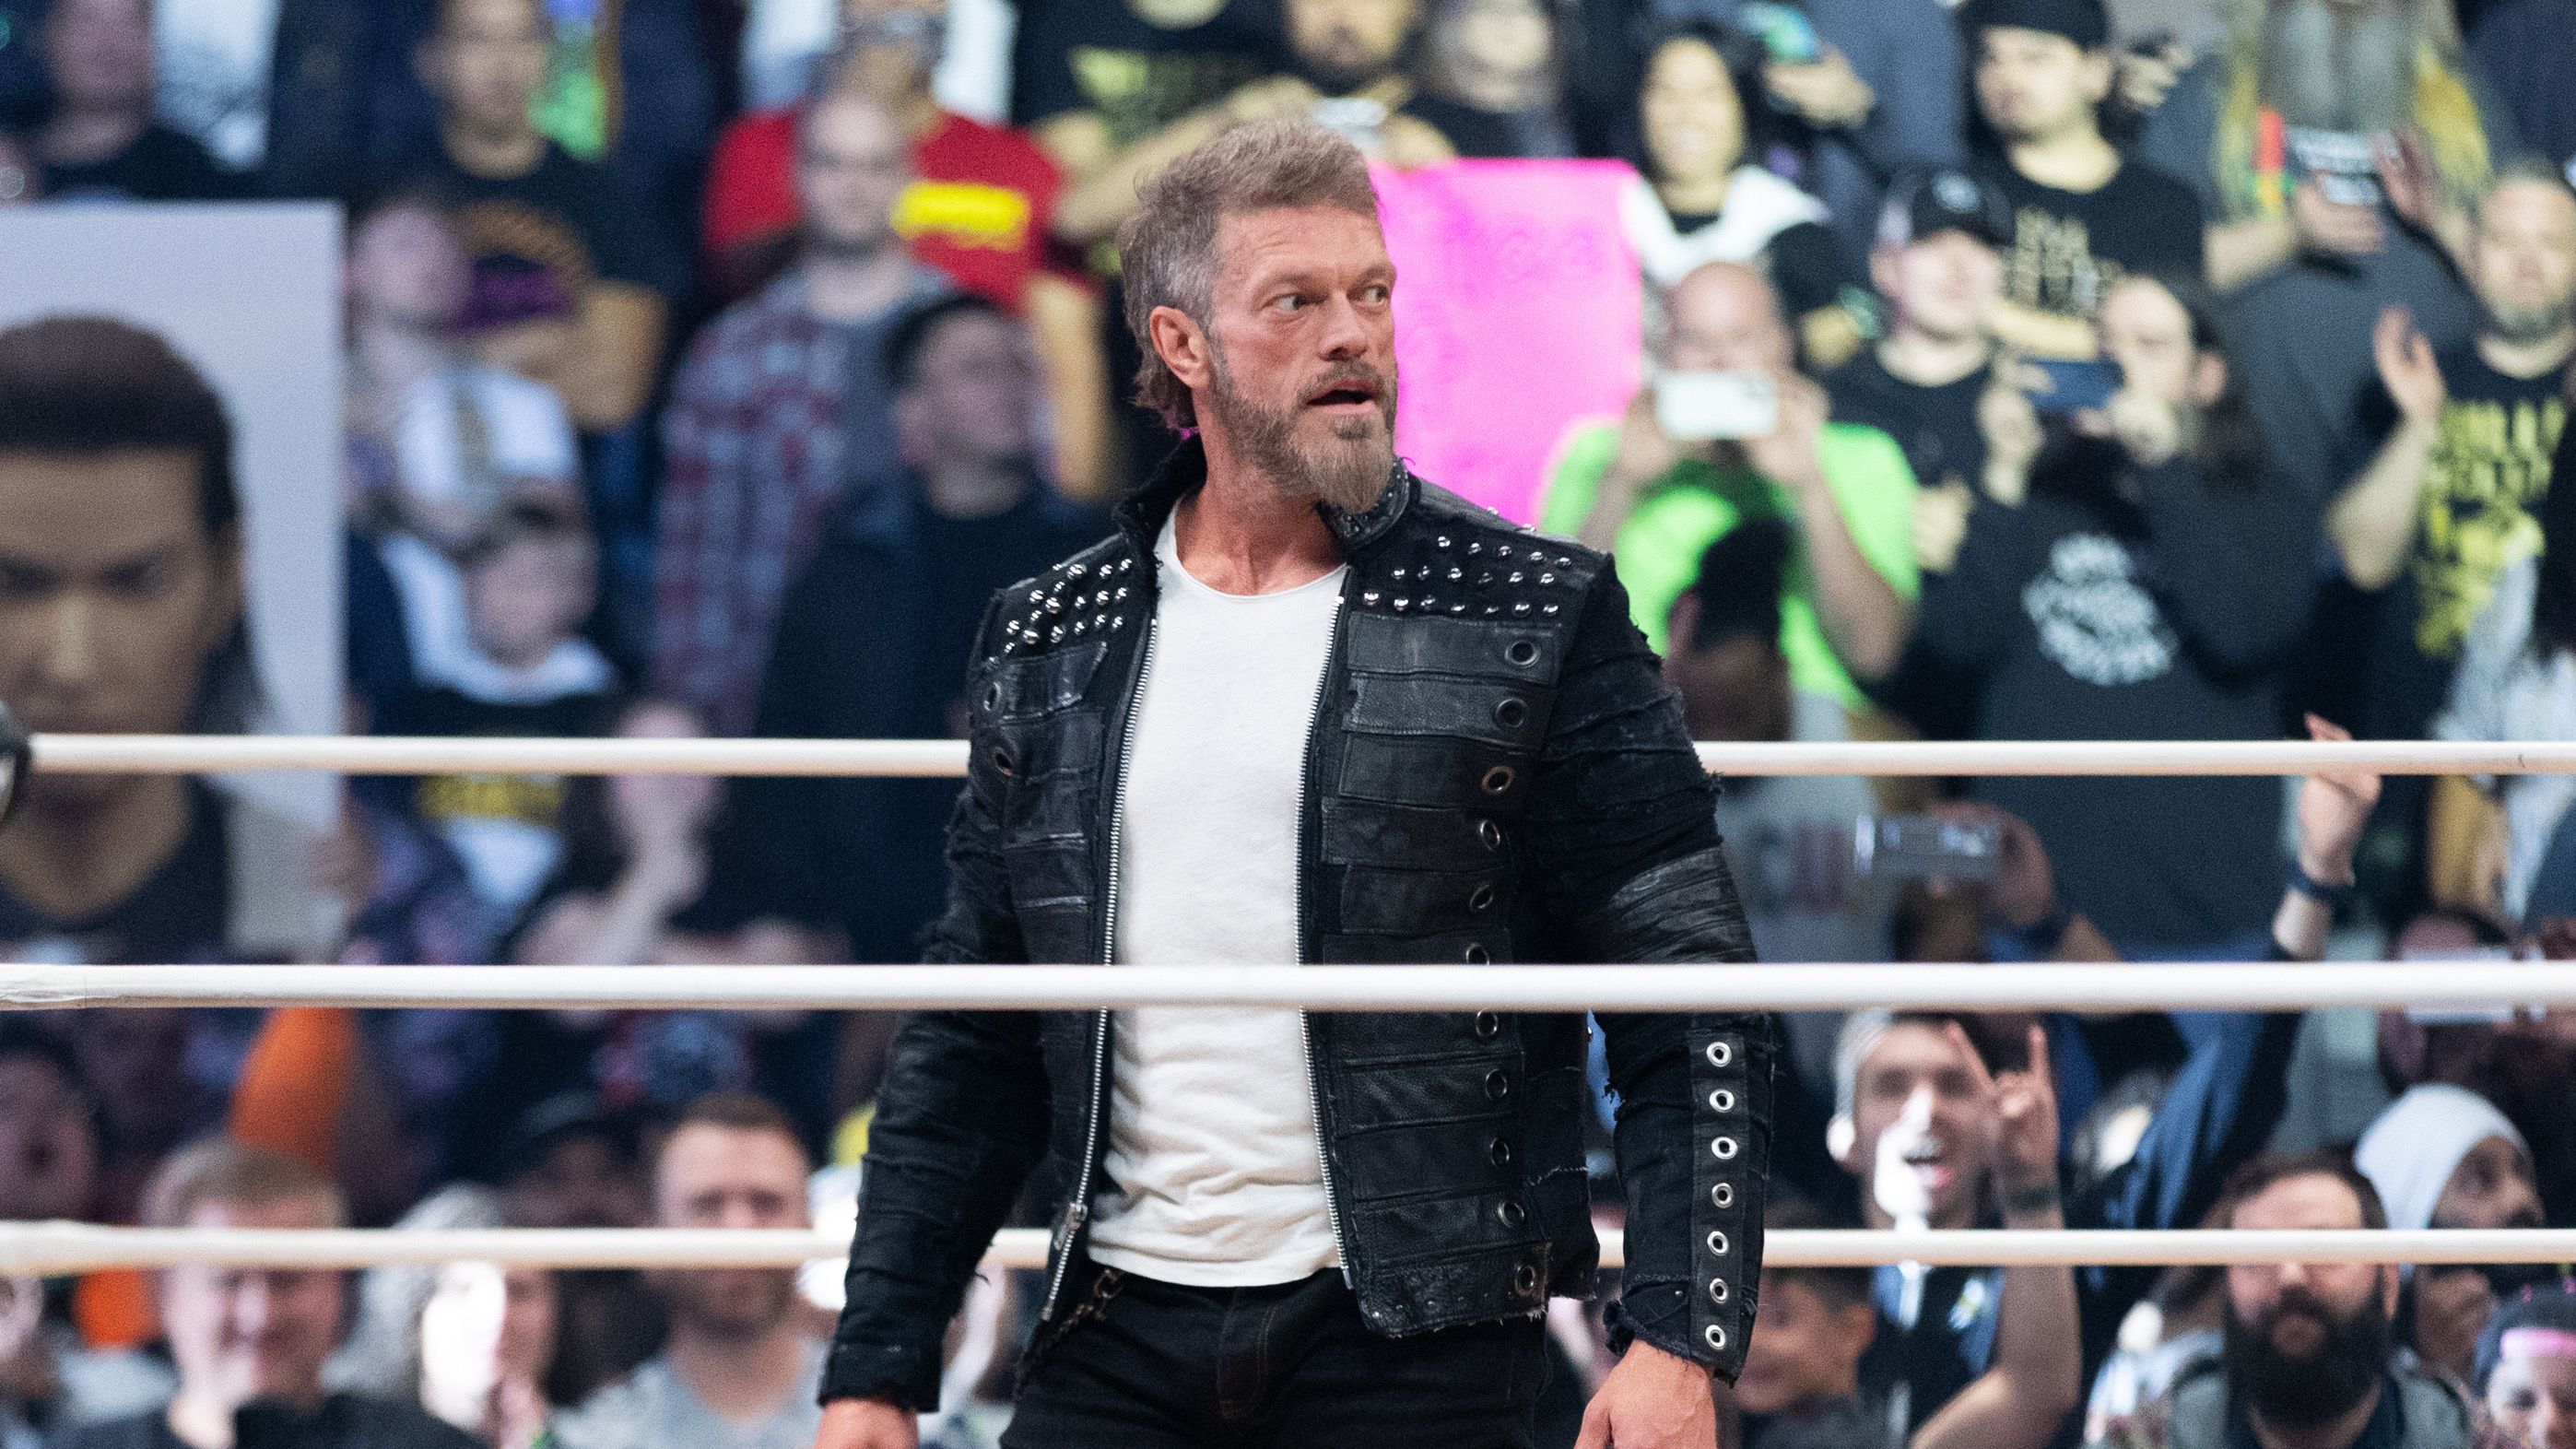 Edge Addresses Crowd After Beating Sheamus On Smackdown